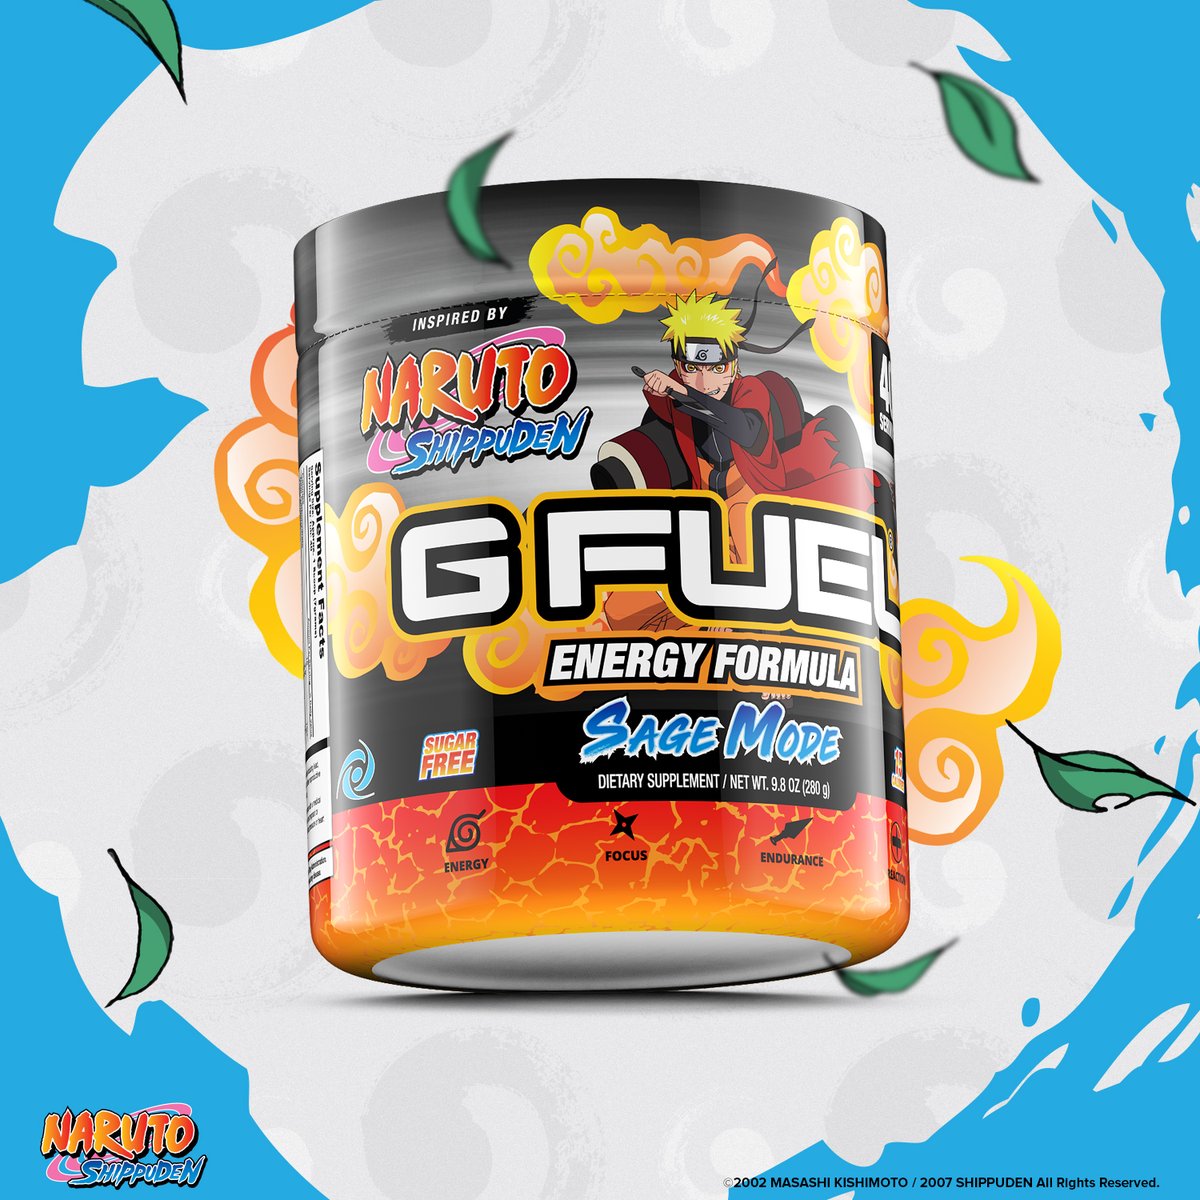 🧡  𝗥𝗧 + 𝗖𝗢𝗠𝗠𝗘𝗡𝗧 'NARUTO' to win a Pomelo White Peach #NARUTO x #GFUEL 'SAGE MODE' Energy Tub!

🥷 2 winners picked tomorrow in honor of #AniMAY!

🛍️ 𝗚𝗘𝗧 𝗬𝗢𝗨𝗥𝗦: GFUEL.com/collections/na…